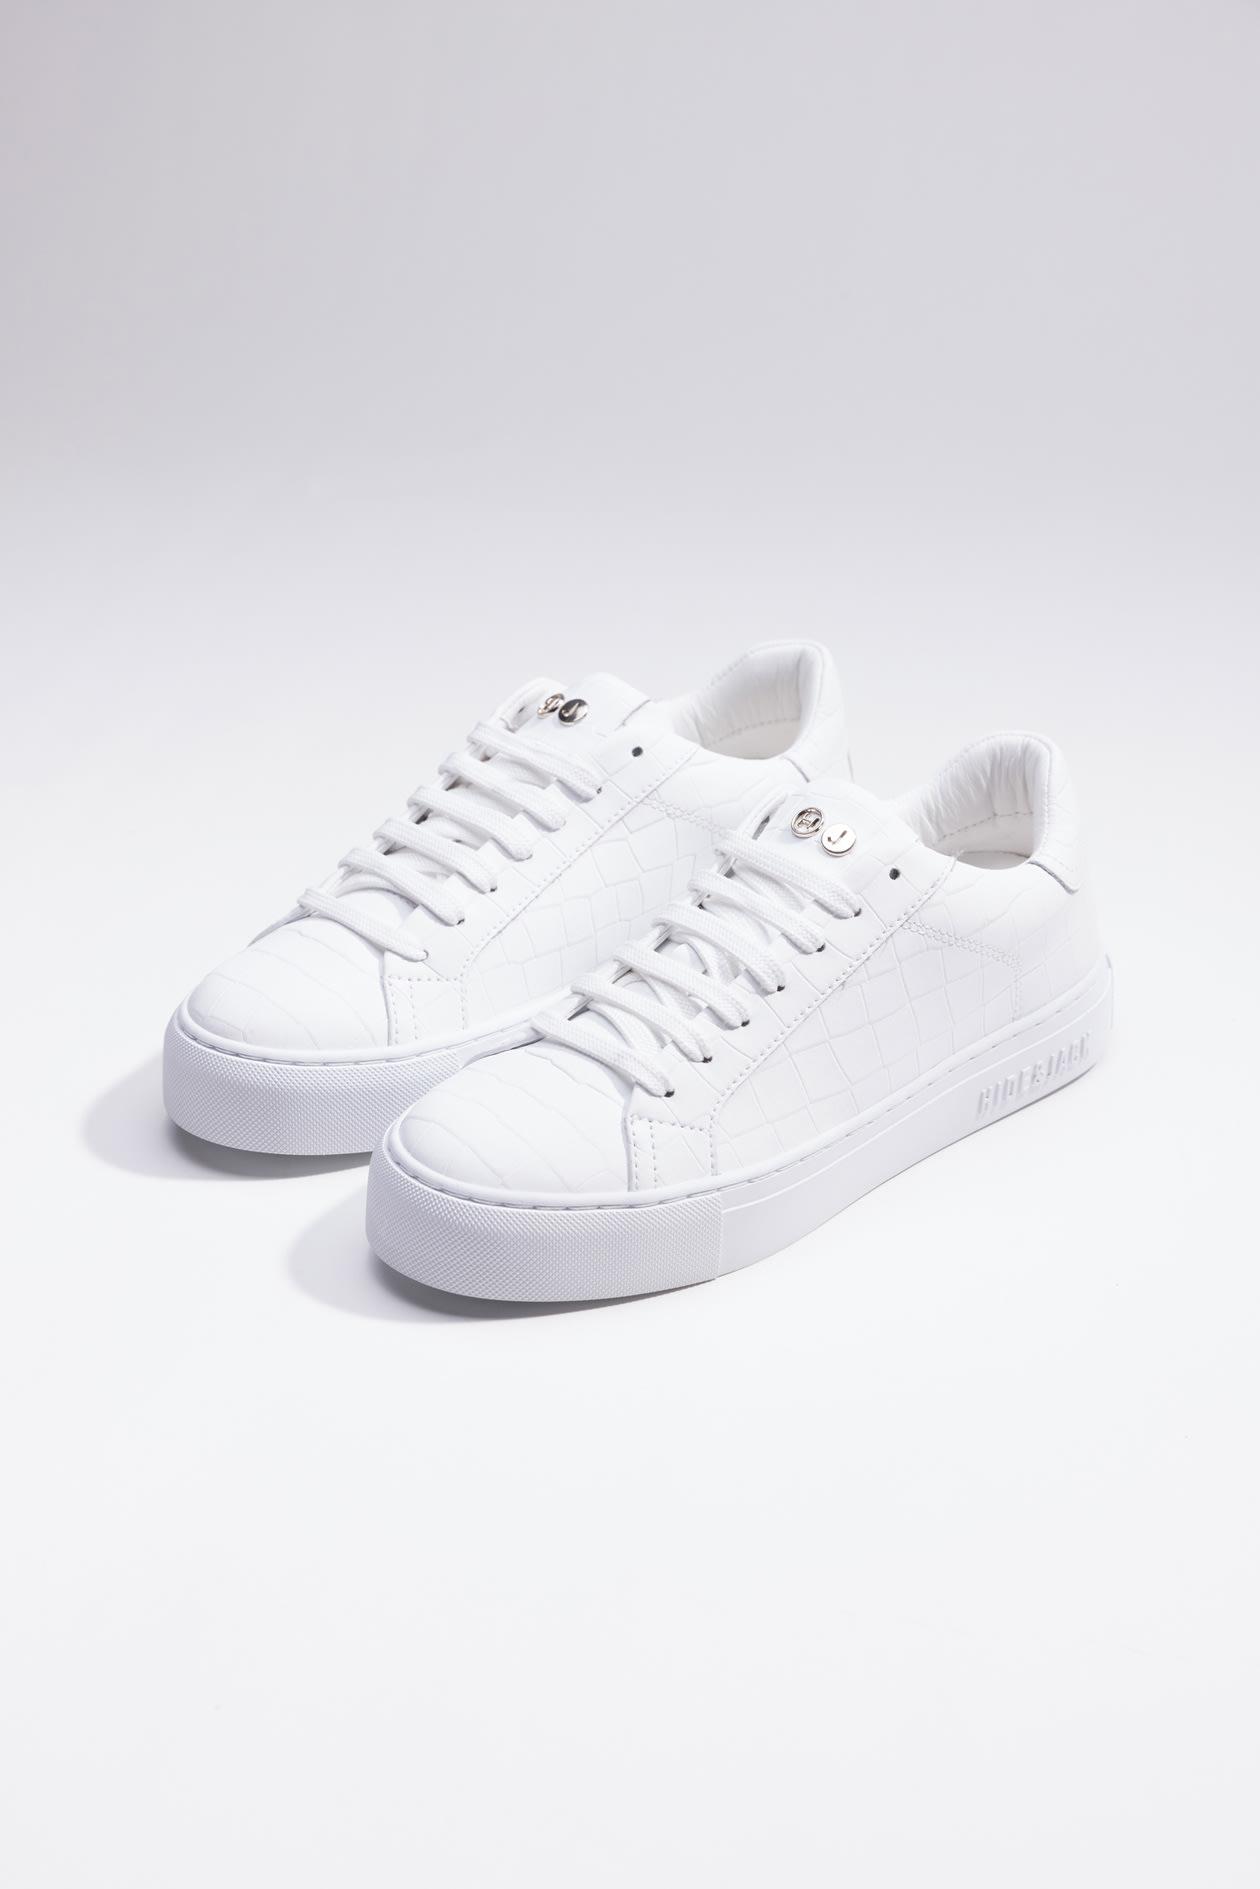 Hide & Jack Low Top Sneaker - Essence Tuscany White